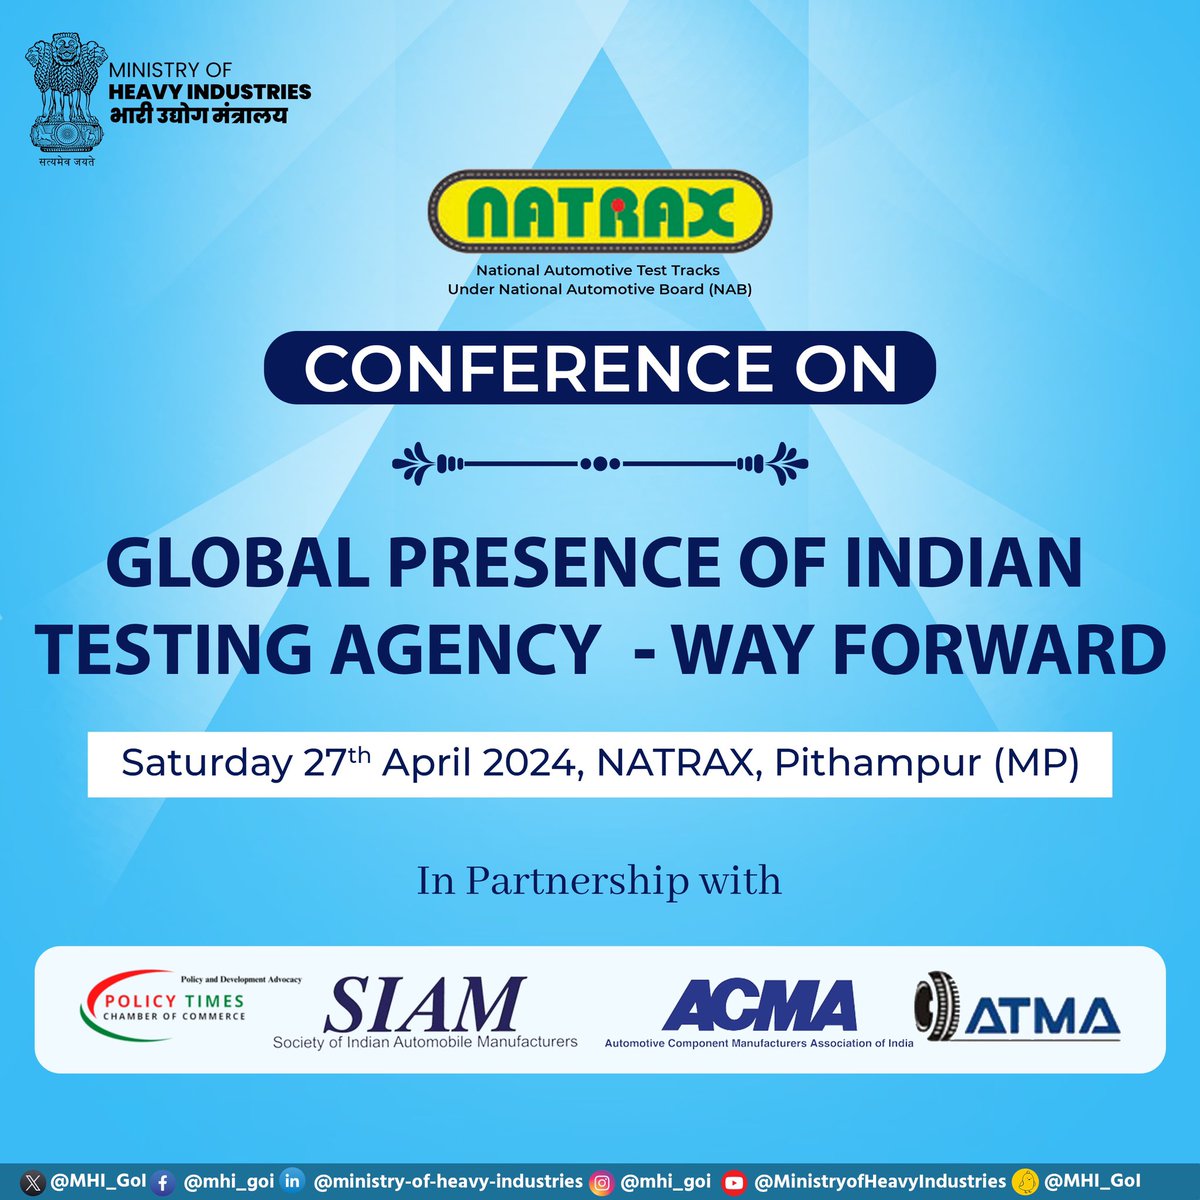 NATRAX, under the aegis of MHI, announces a pioneering conference 'Global Presence of Indian Testing Agency - Way Forward' on April 27th, 2024 at NATRAX, Pithampur, MP. Join us to foster collaboration among industries, test agencies, government bodies, tech players, and academia.